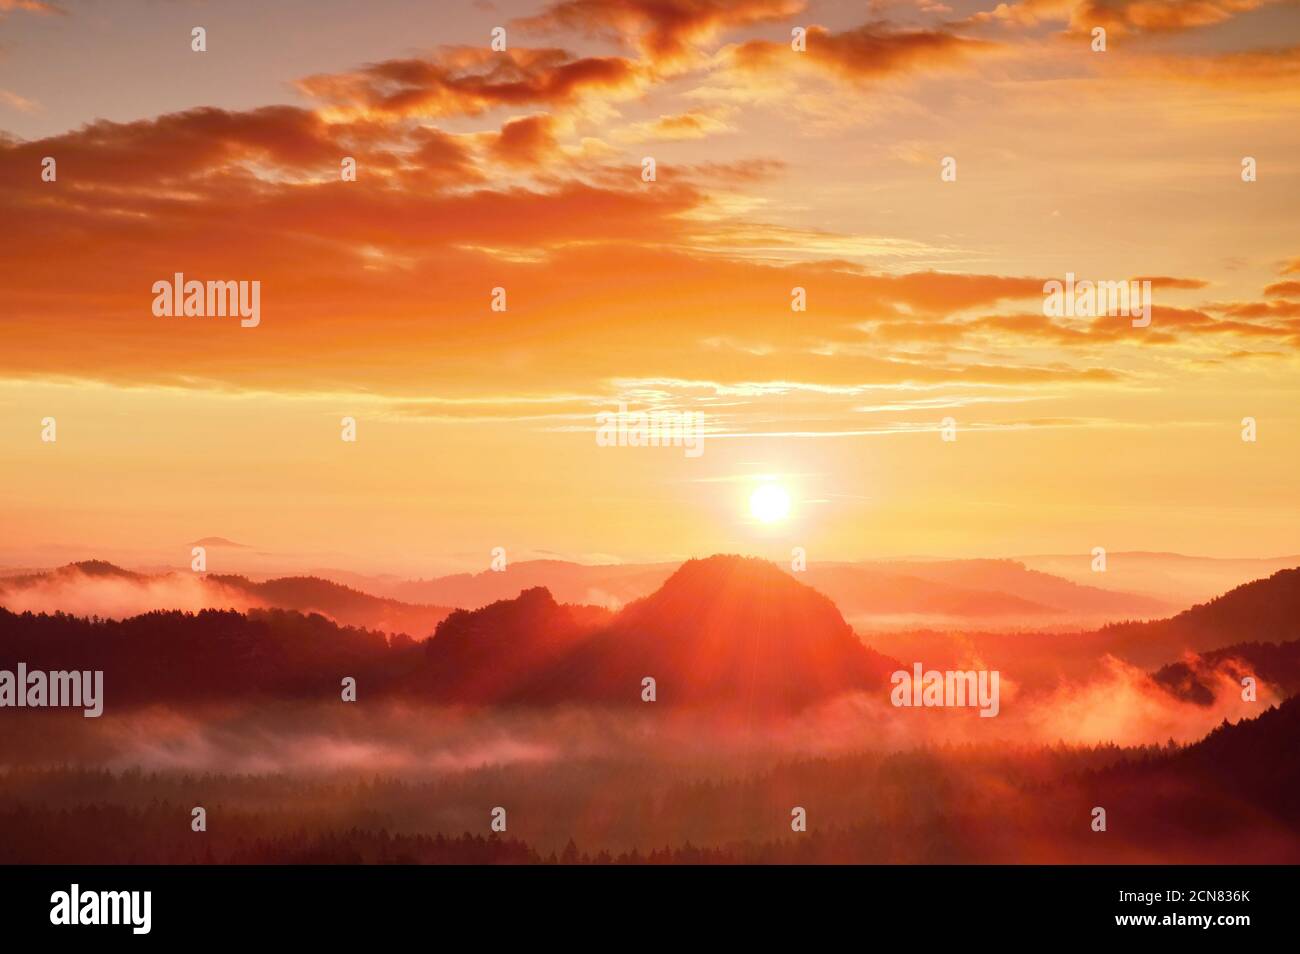 Red misty daybreak. Foggy autumn morning in a beautiful hills. Peaks of hills are sticking out from rich colorful clouds. Stock Photo